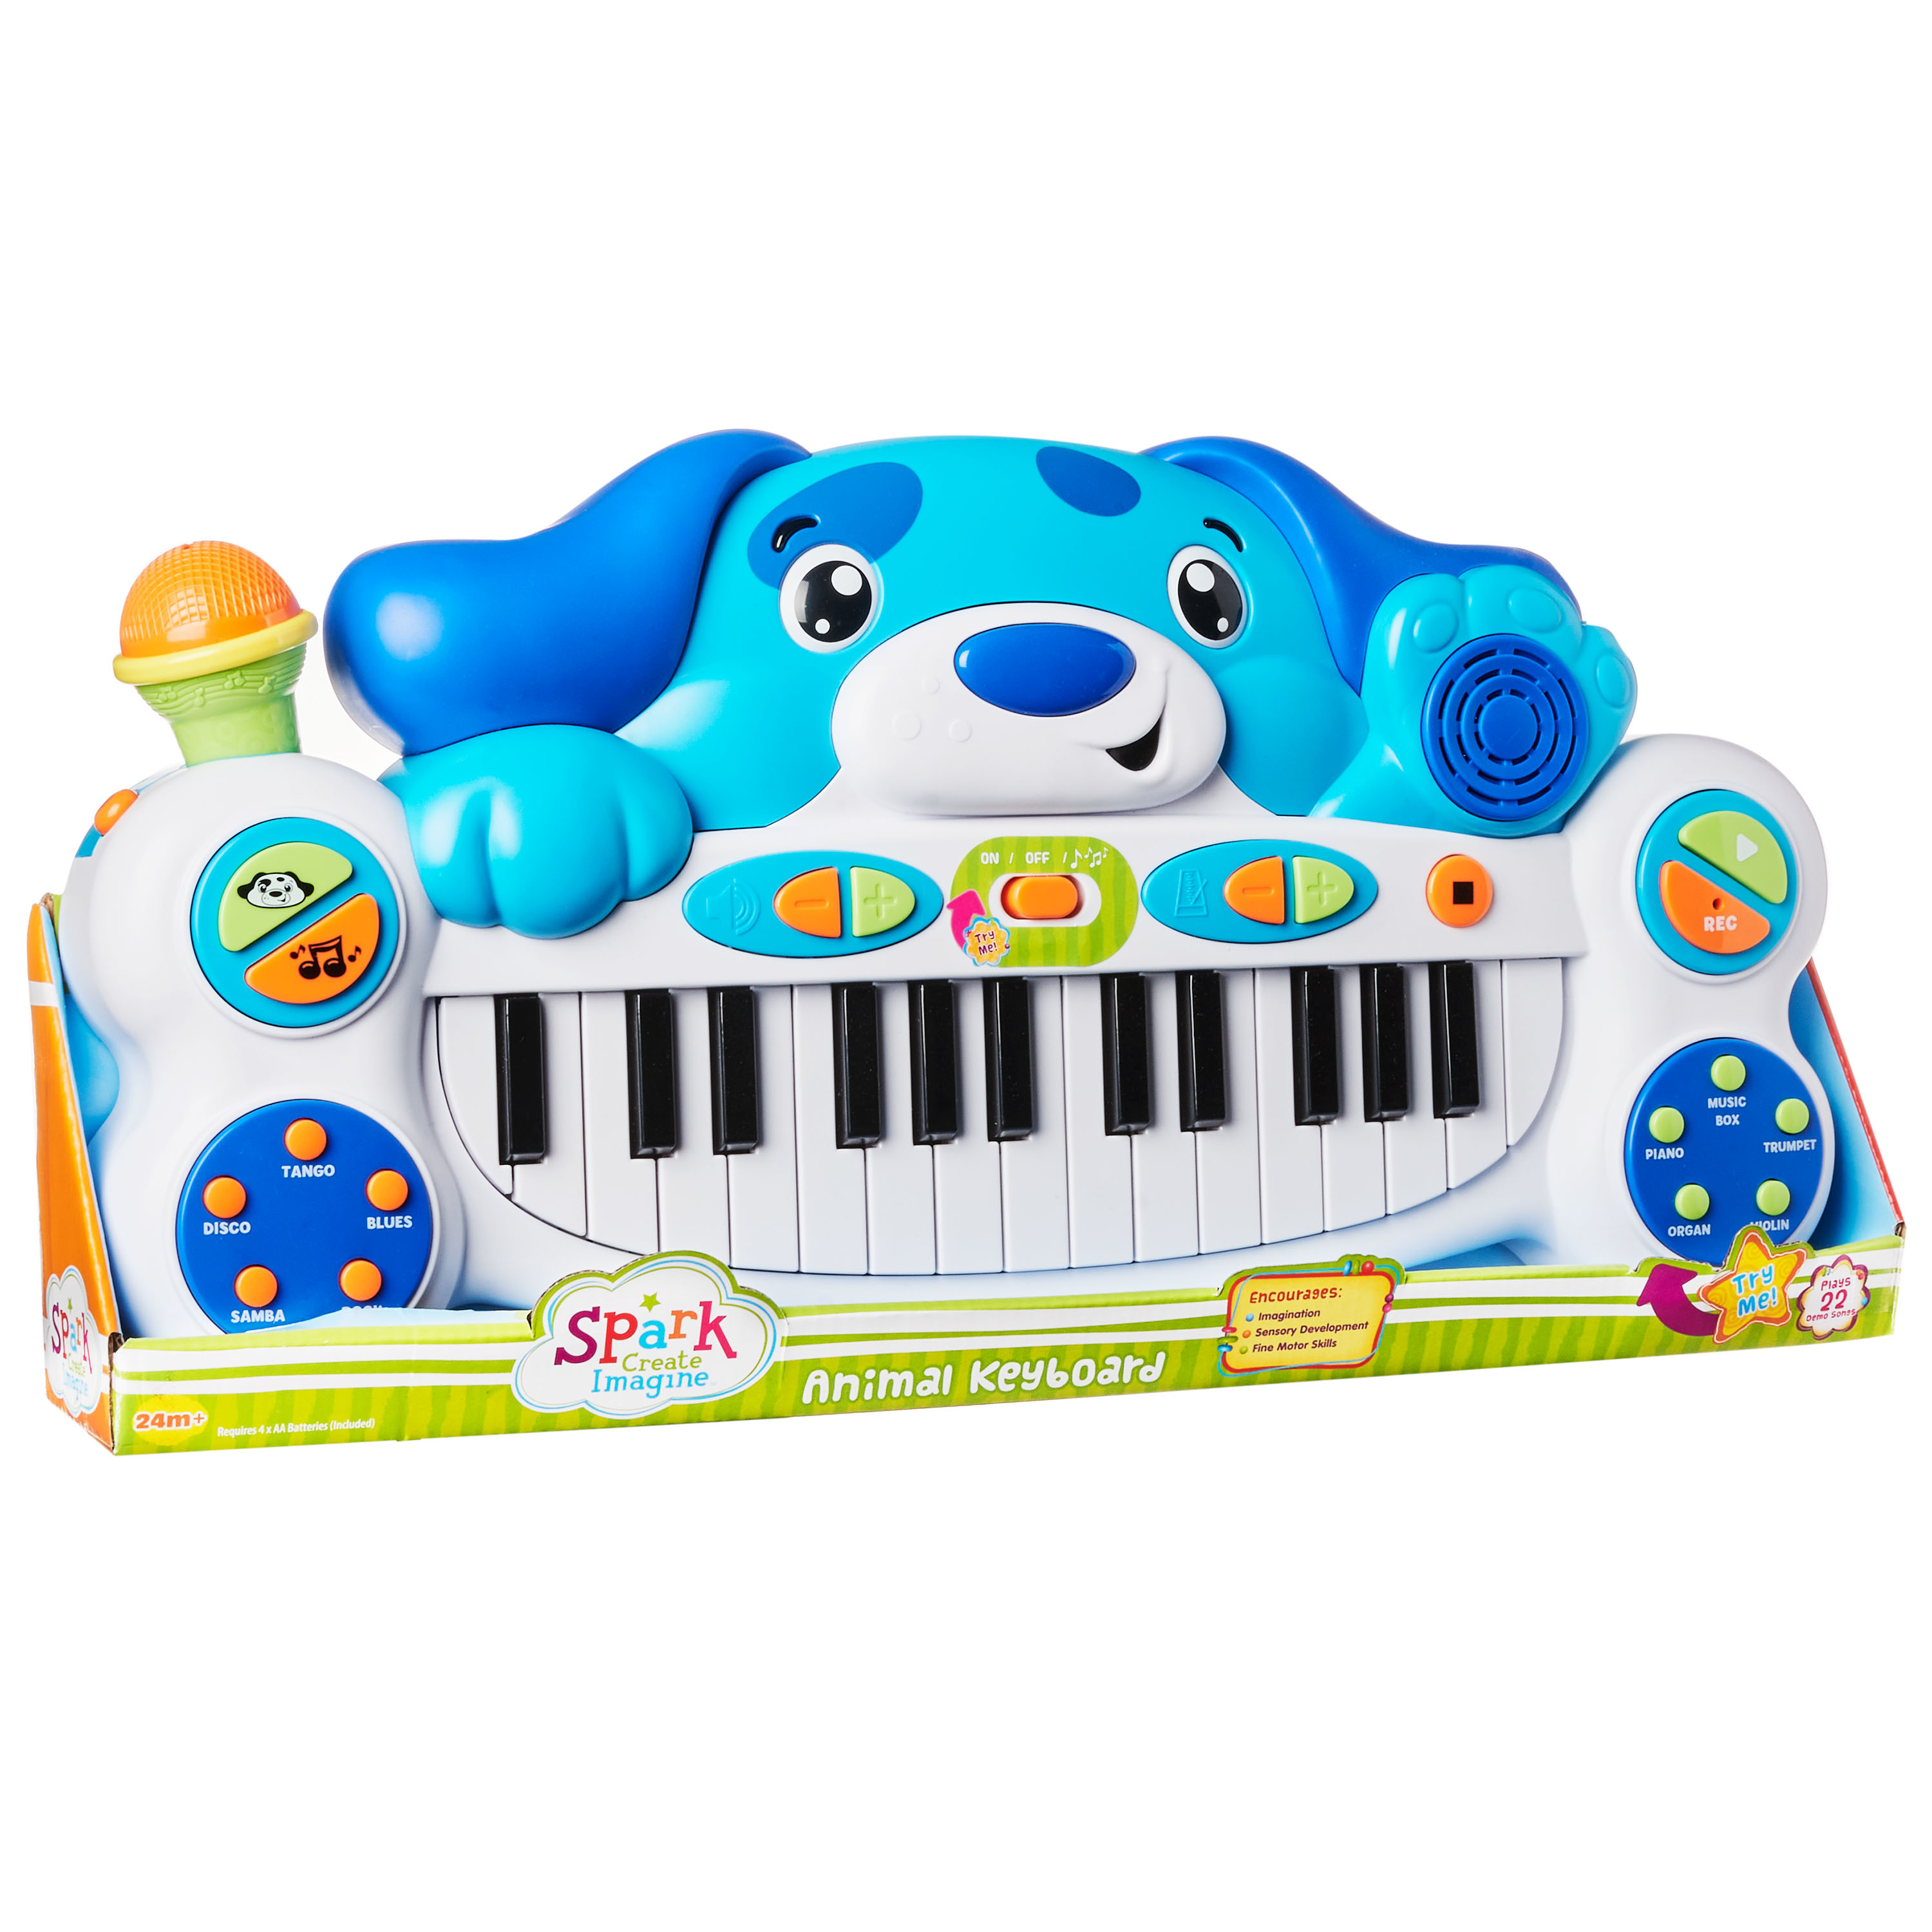 Spark Create Imagine Animal Keyboard, Toy Musical Instrument: Puppy Piano, 24 Month+, Child - image 4 of 6